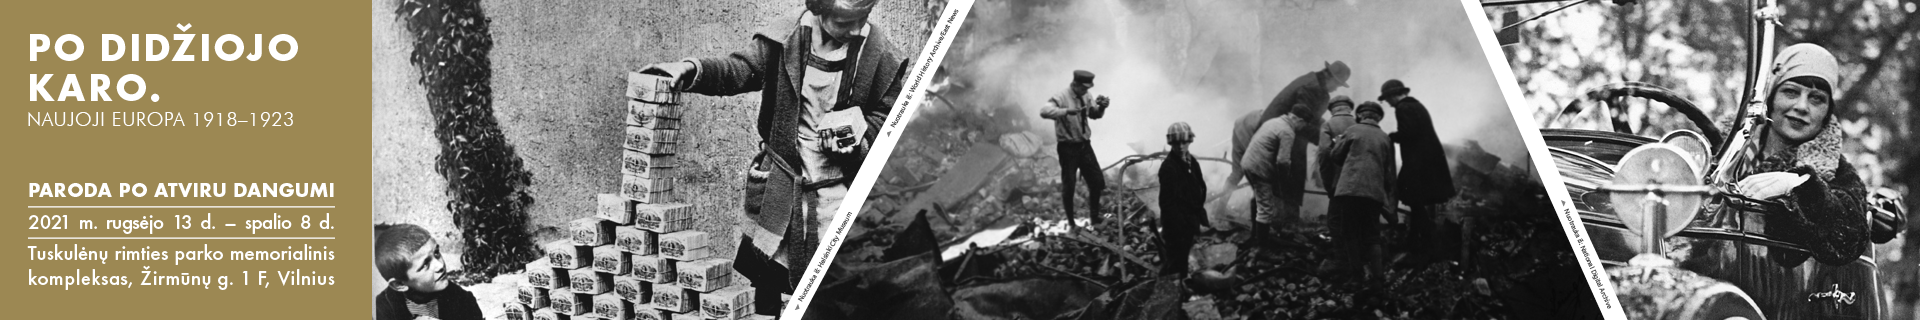 cover image of After the Great War in Vilnius project